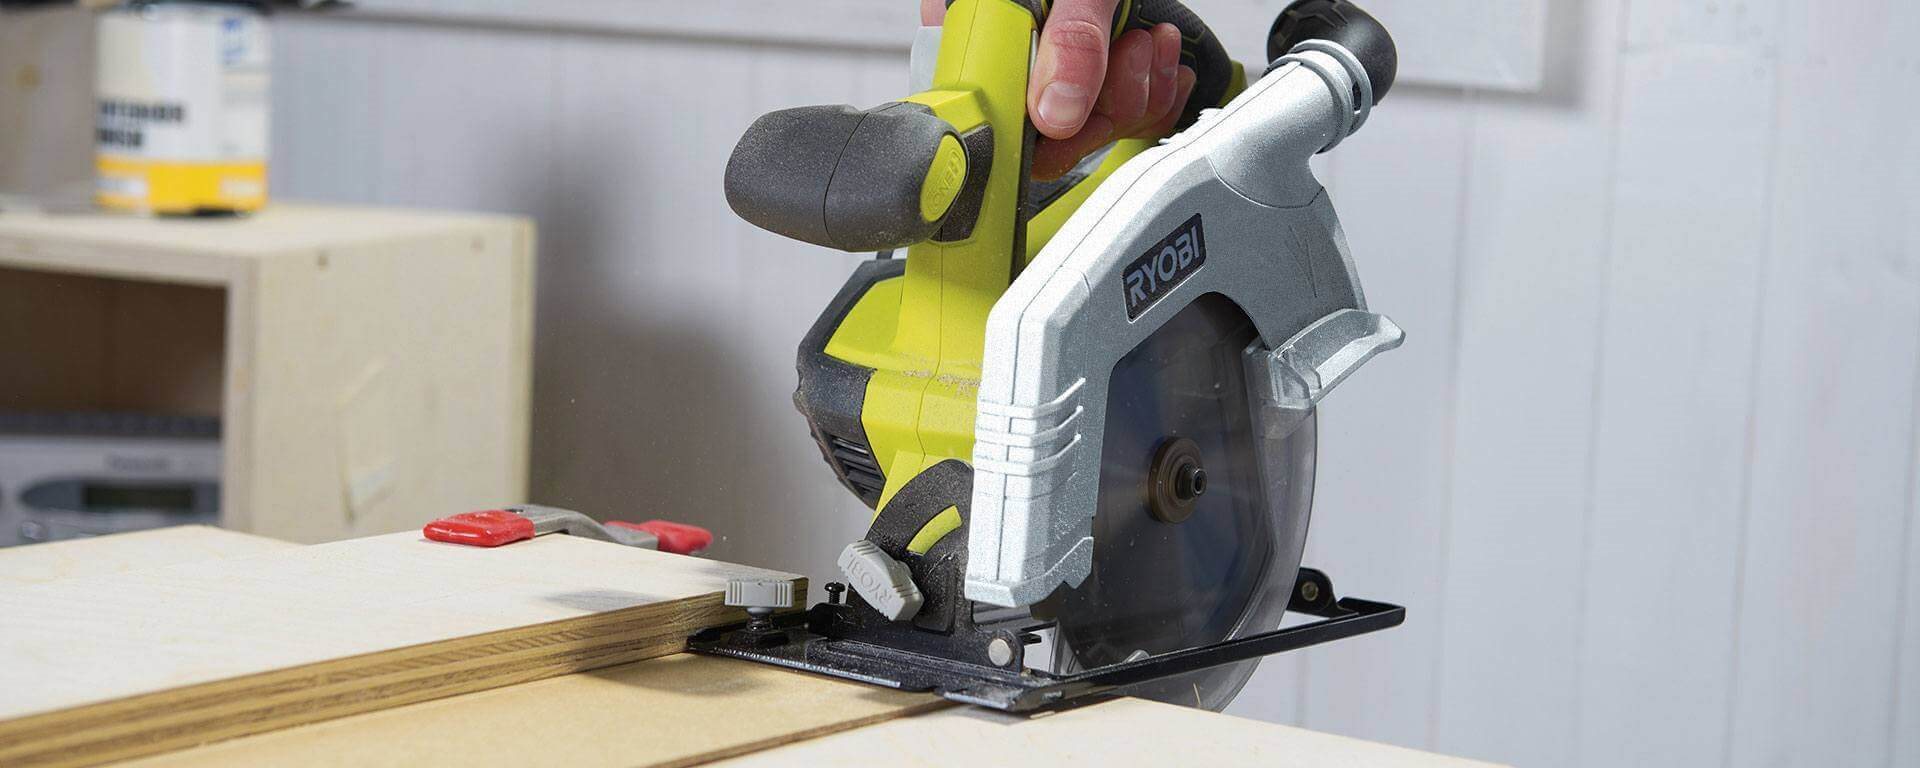 How To Cut Sheet Material On Your Workbench Using A Circular Saw